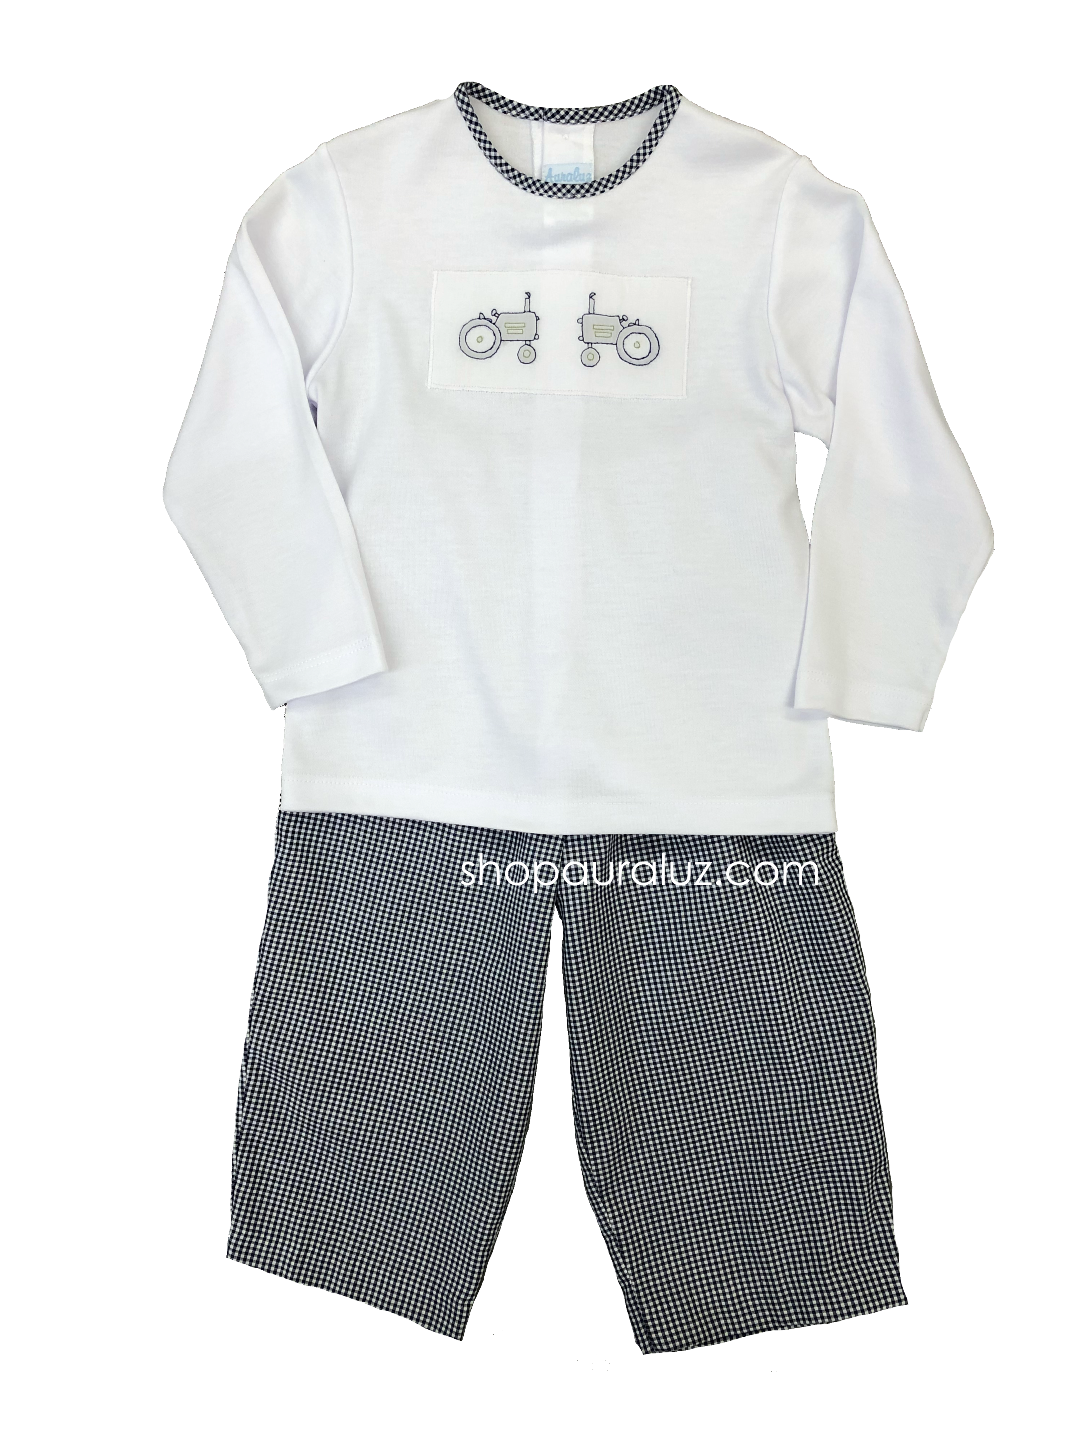 Auraluz 2pc Set...White l/s knit shirt with embroidered tractors and navy check pants